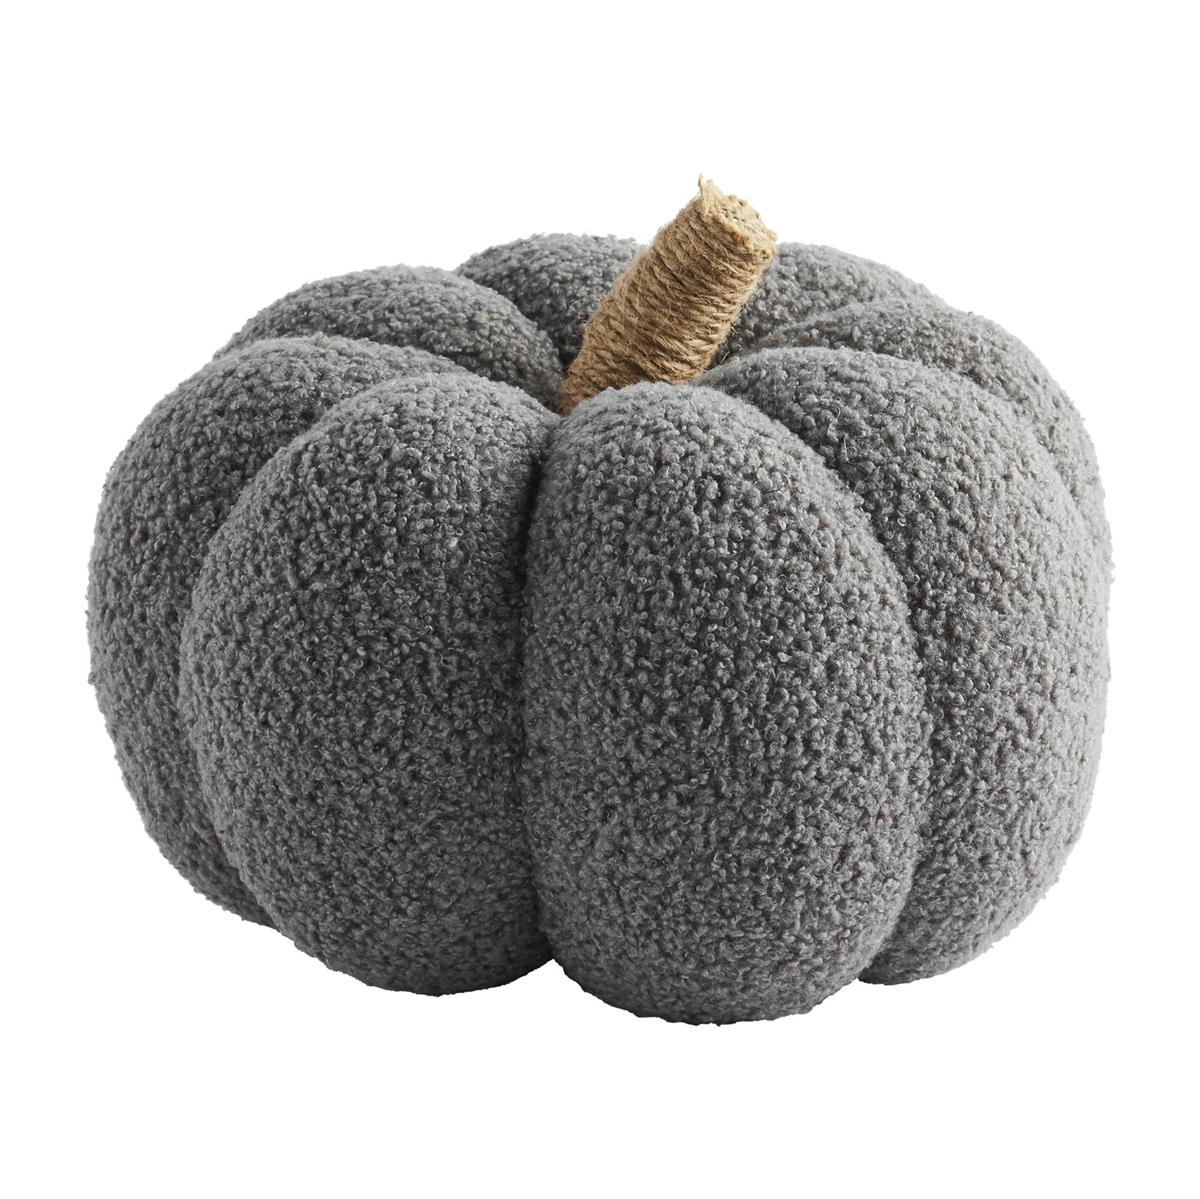 Mud Pie Shearling Pumpkins - BeautyOfASite - Central Illinois Gifts, Fashion & Beauty Boutique